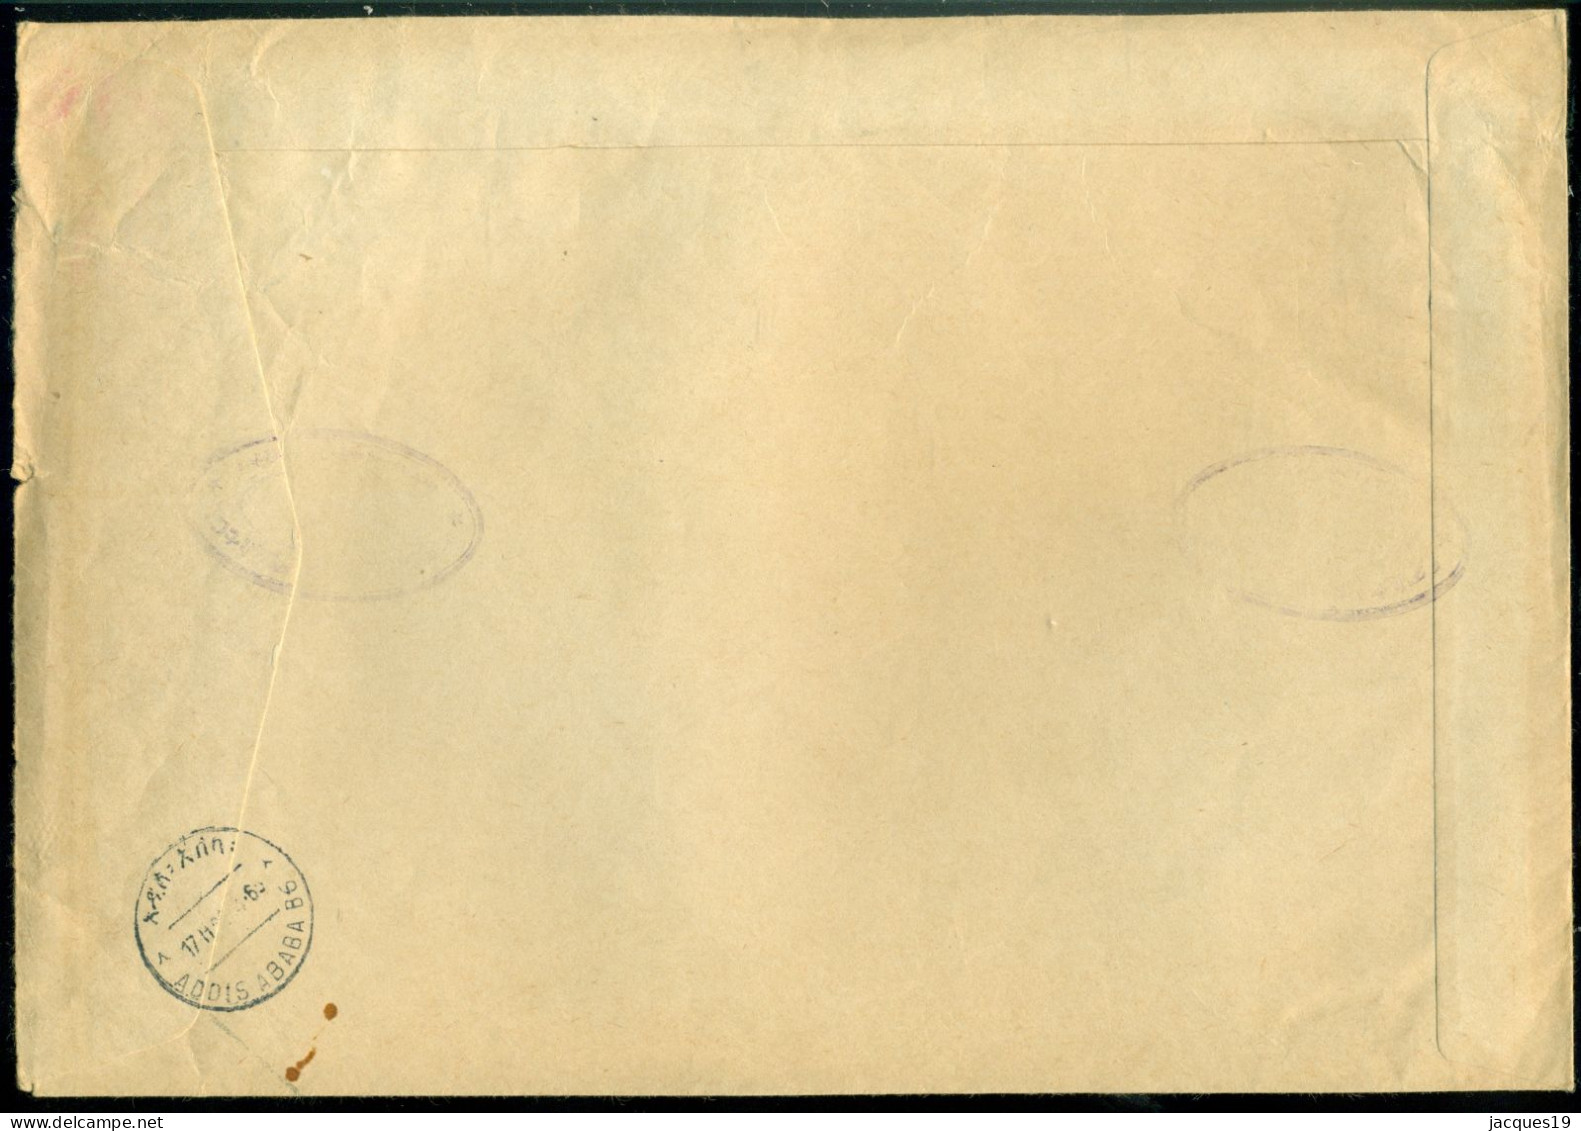 Ethiopia 1965 Registered Cover To The Netherlands From Post Administration No Stamp - Ethiopie